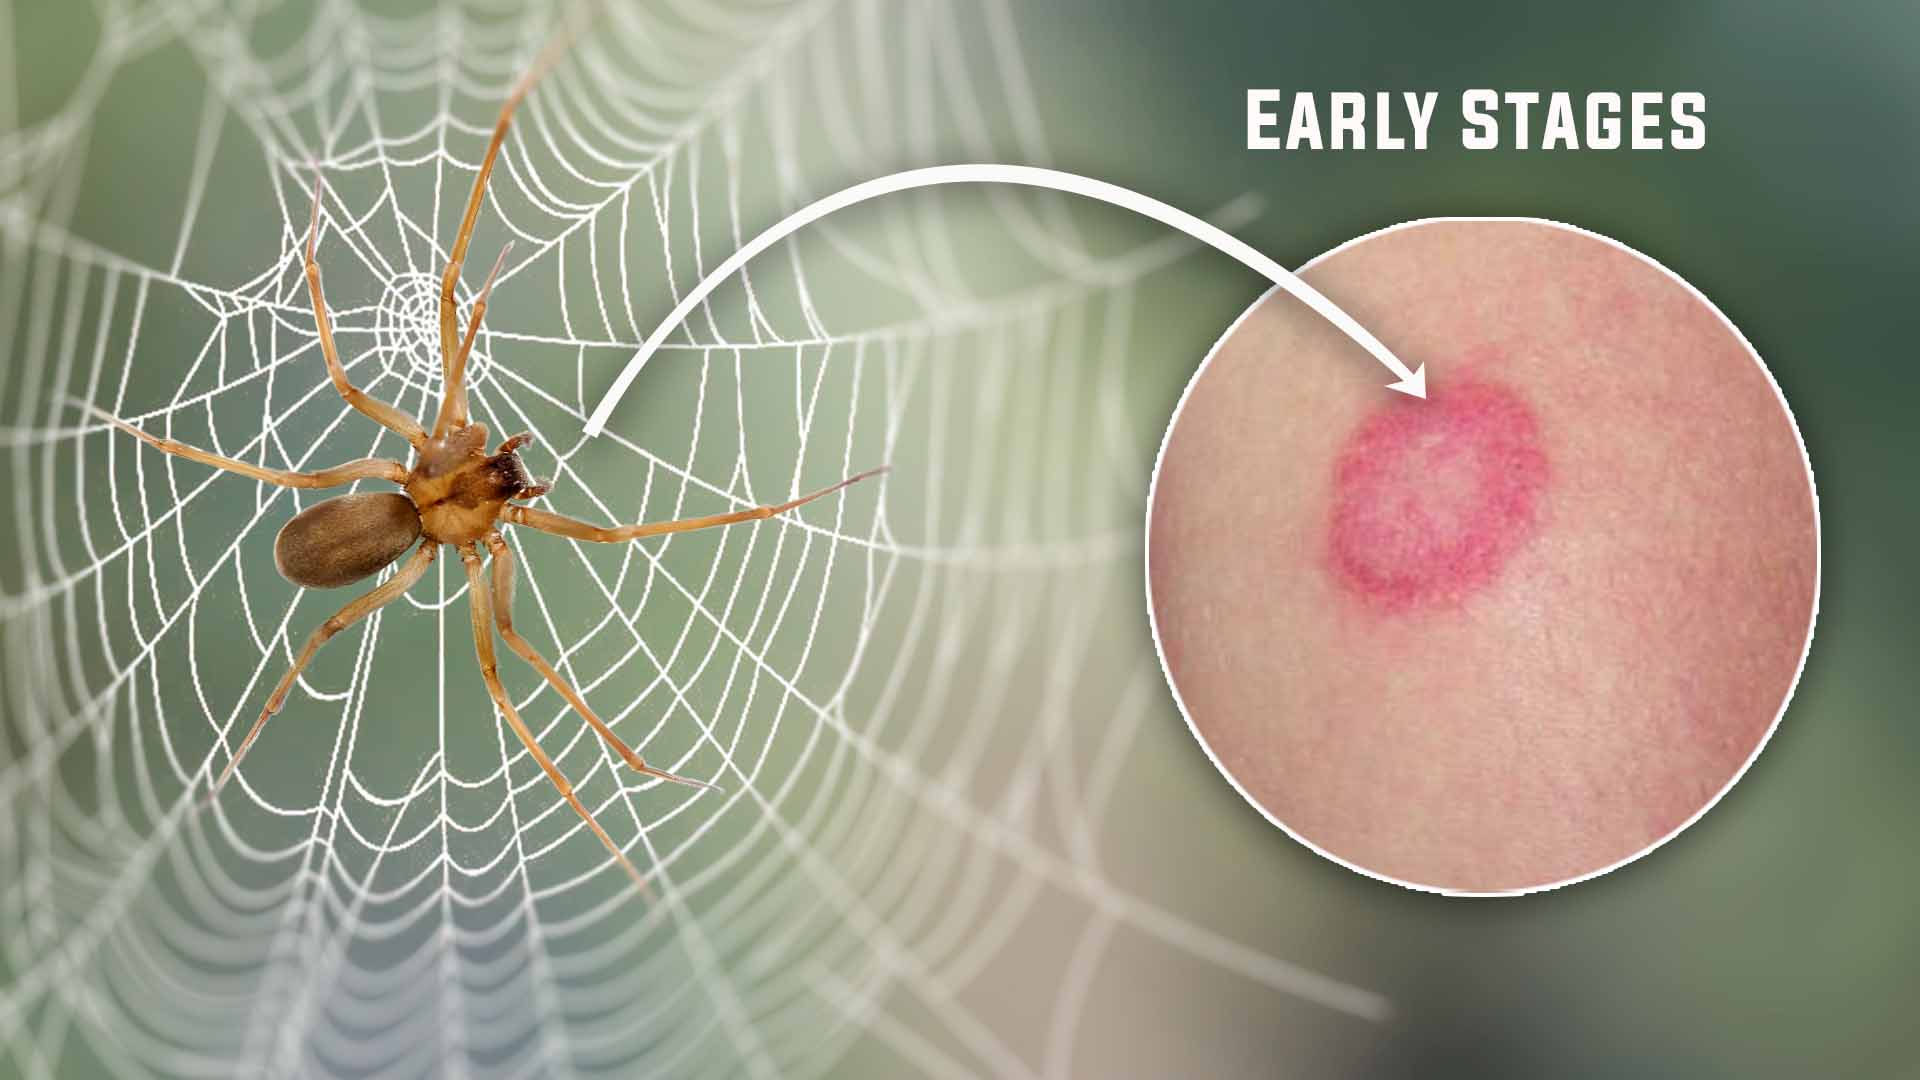 Brown Recluse Spider Bite Pictures Early Stages